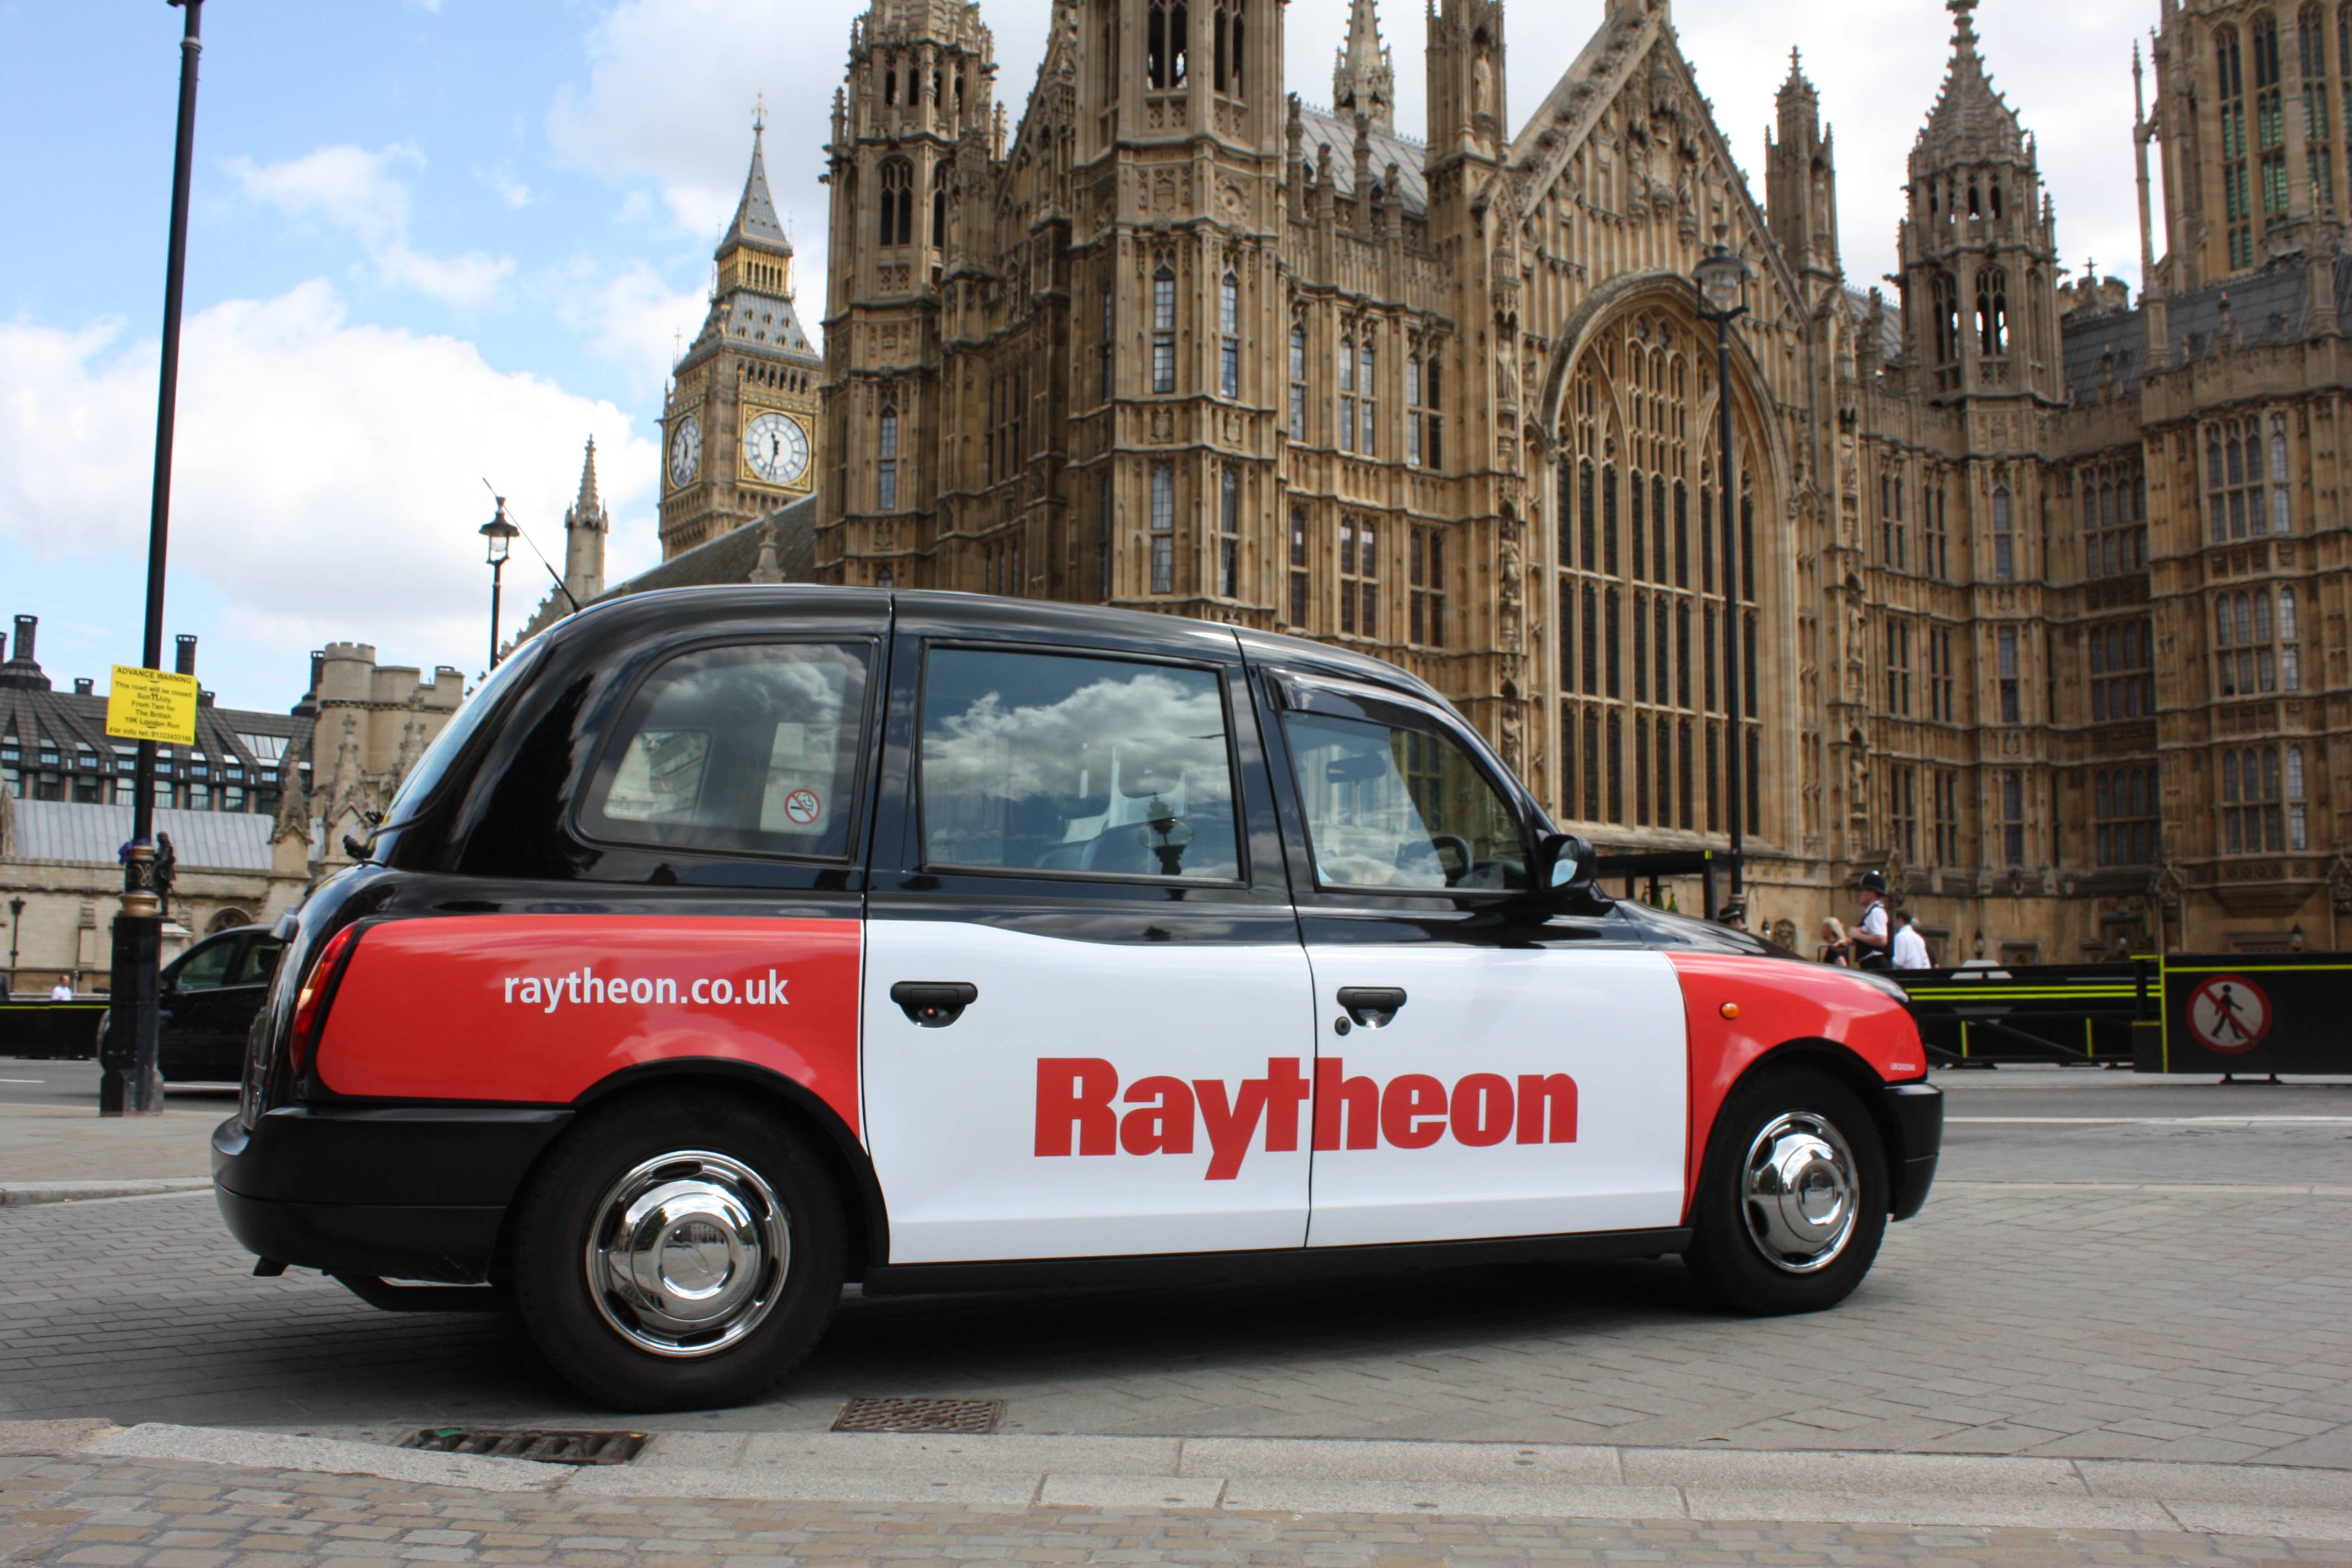 2010 Ubiquitous taxi advertising campaign for Raytheon - Raytheon.co.uk